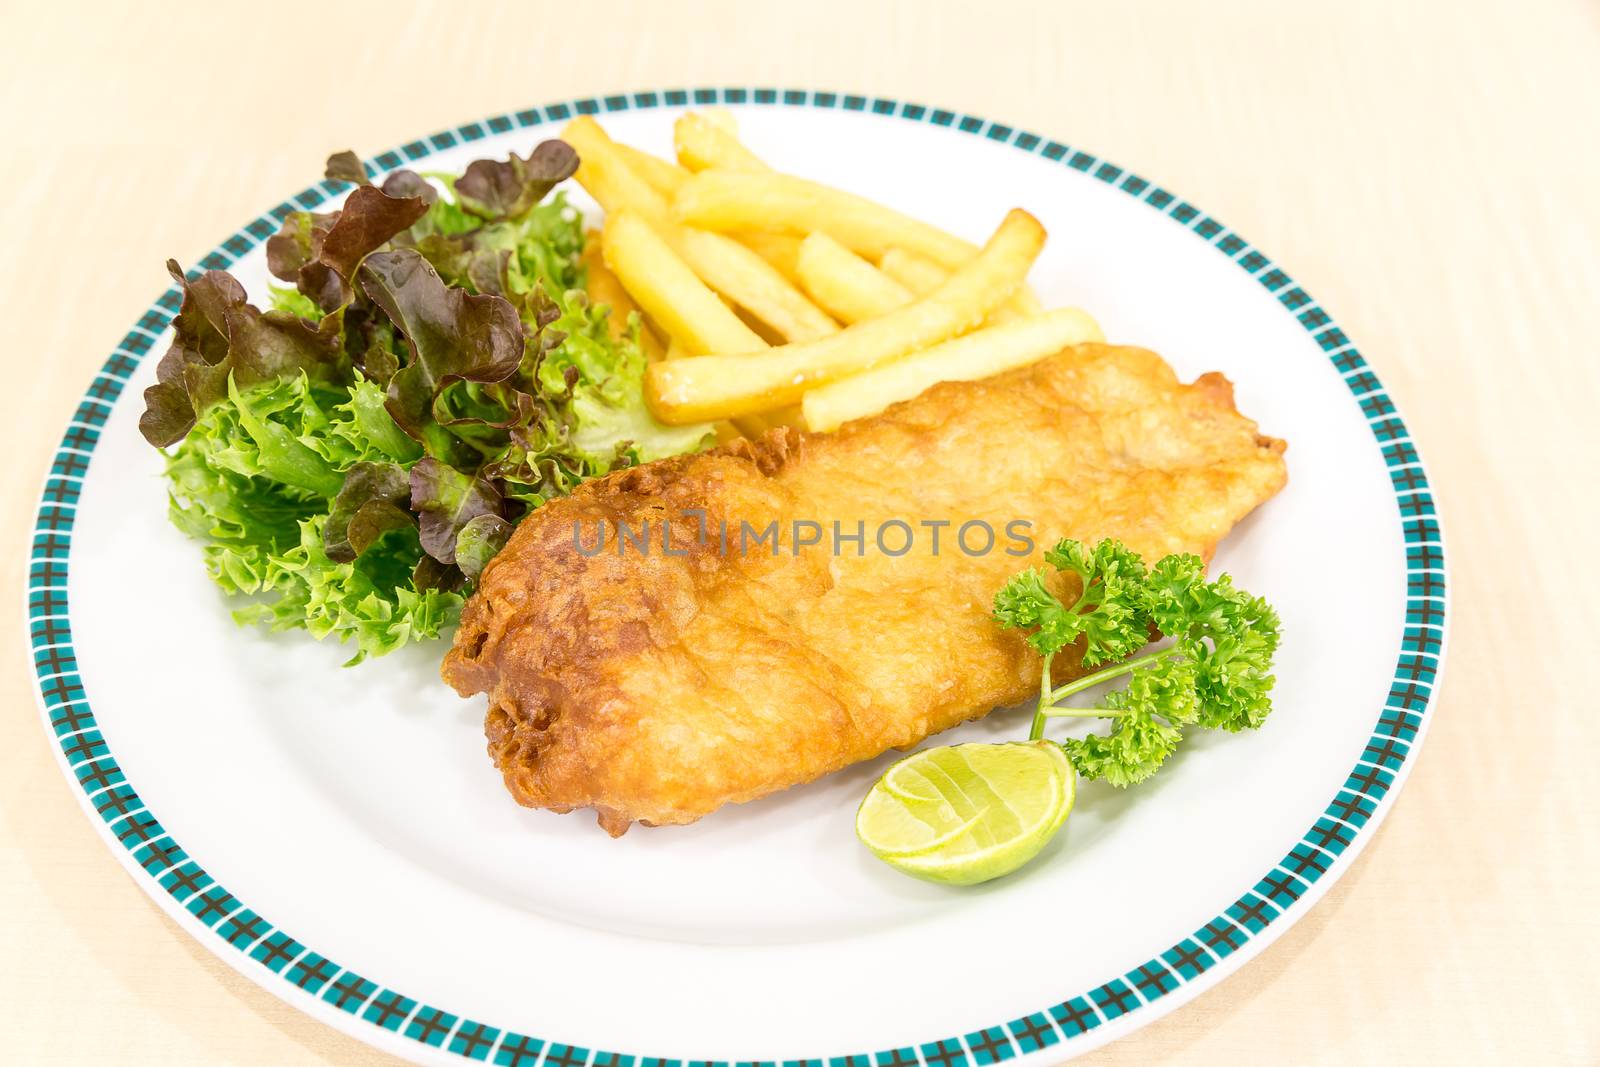 fish and chips by vichie81